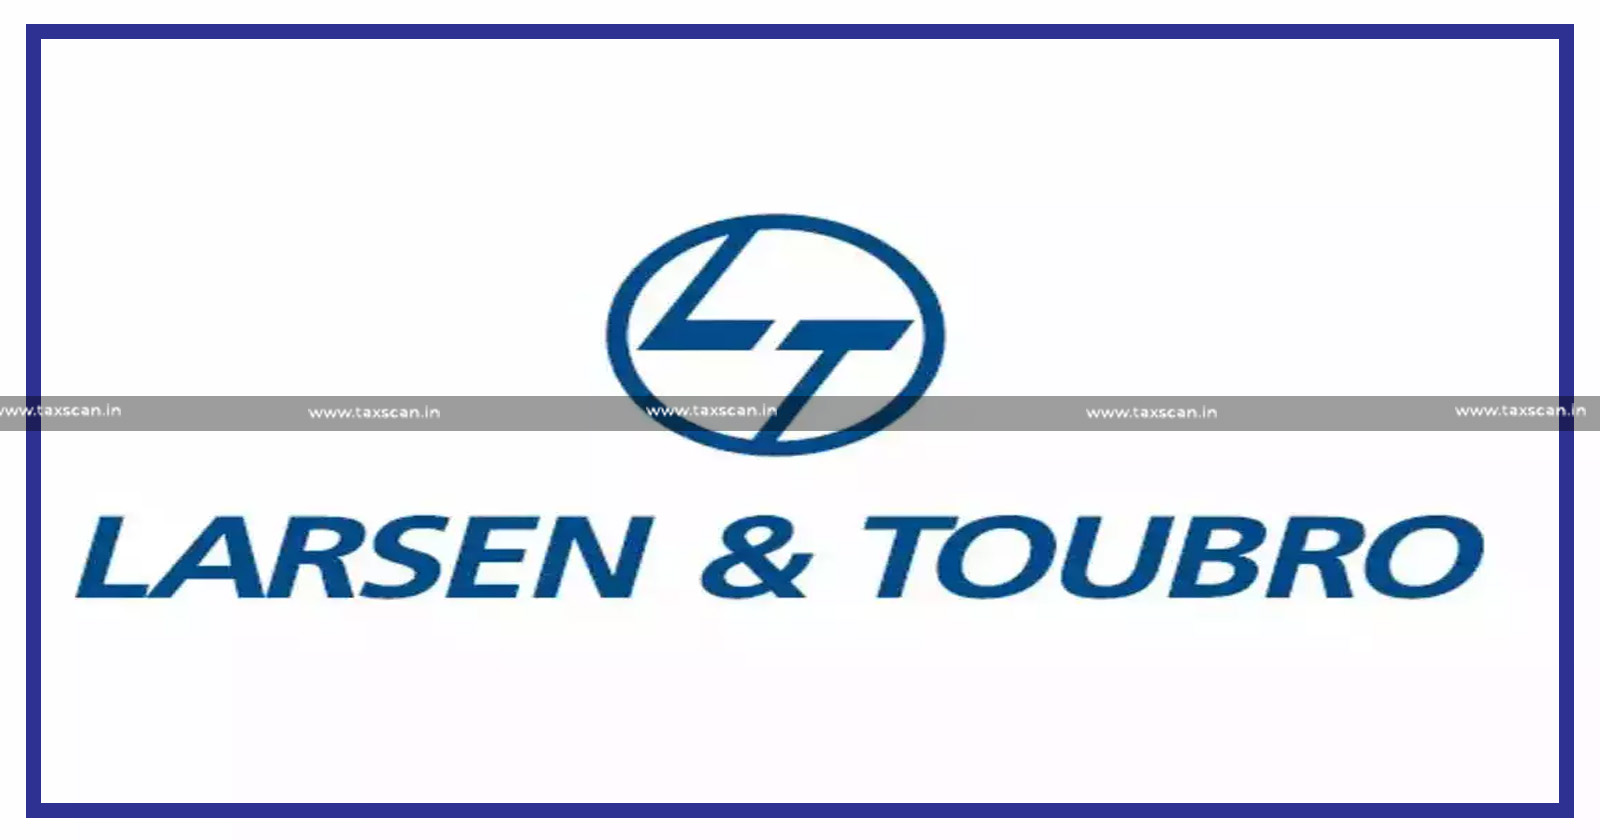 Relief - Larsen & Toubro Limited - Relief to Larsen & Toubro Limited - Bombay High Court - taxscan